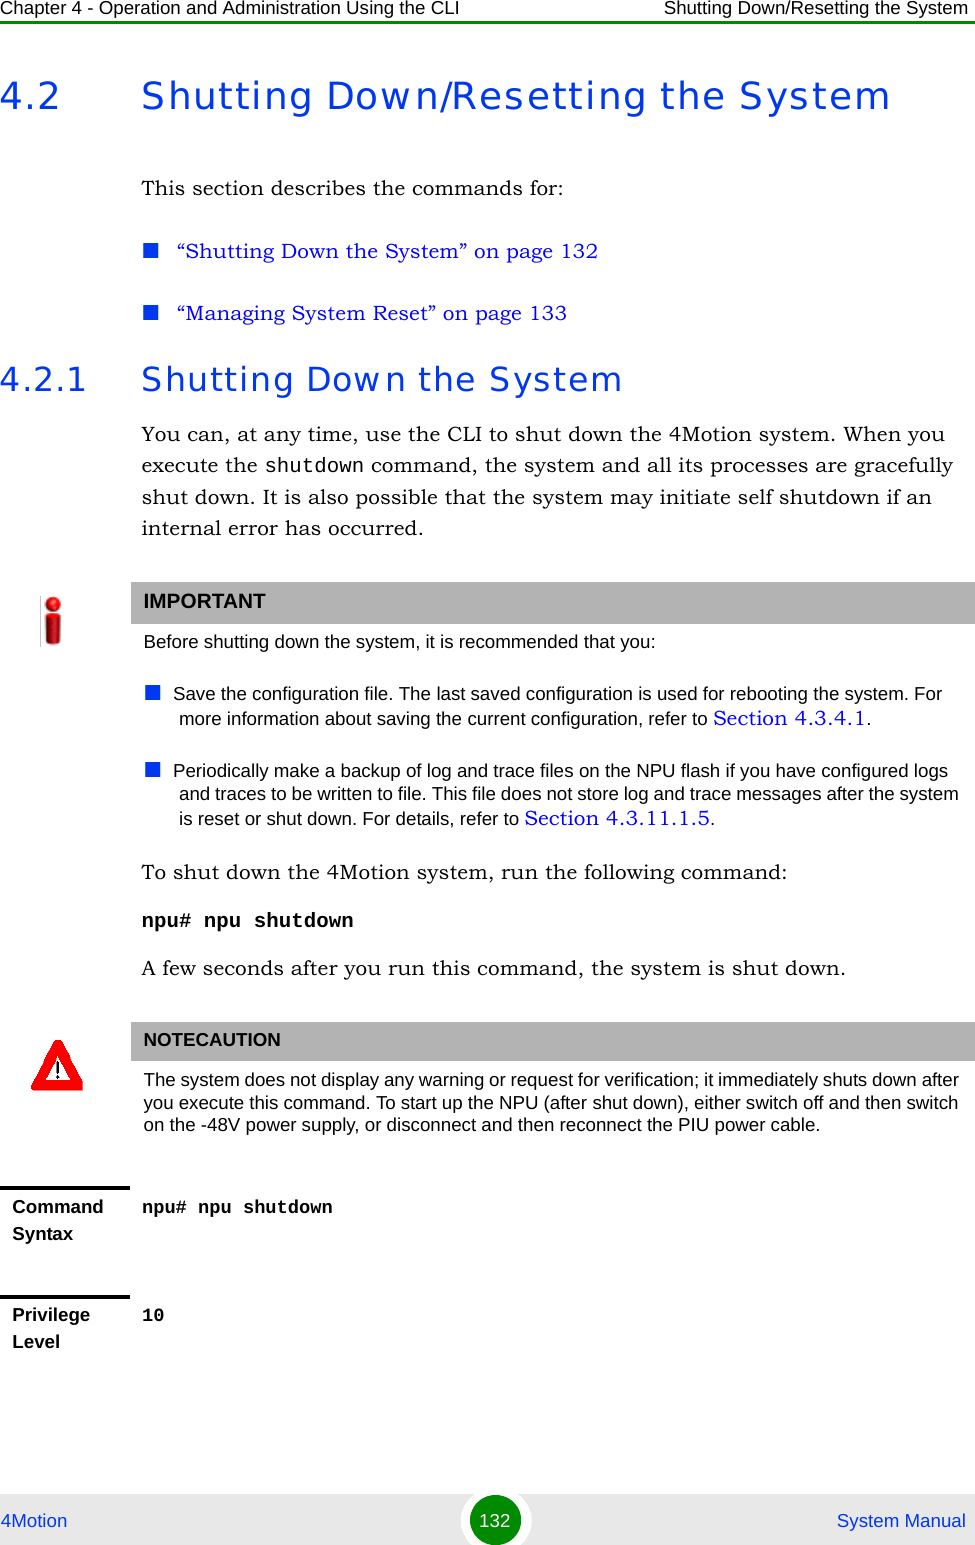 Chapter 4 - Operation and Administration Using the CLI Shutting Down/Resetting the System4Motion 132  System Manual4.2 Shutting Down/Resetting the SystemThis section describes the commands for:“Shutting Down the System” on page 132“Managing System Reset” on page 1334.2.1 Shutting Down the SystemYou can, at any time, use the CLI to shut down the 4Motion system. When you execute the shutdown command, the system and all its processes are gracefully shut down. It is also possible that the system may initiate self shutdown if an internal error has occurred.To shut down the 4Motion system, run the following command:npu# npu shutdownA few seconds after you run this command, the system is shut down.IMPORTANTBefore shutting down the system, it is recommended that you:Save the configuration file. The last saved configuration is used for rebooting the system. For more information about saving the current configuration, refer to Section 4.3.4.1.Periodically make a backup of log and trace files on the NPU flash if you have configured logs and traces to be written to file. This file does not store log and trace messages after the system is reset or shut down. For details, refer to Section 4.3.11.1.5.NOTECAUTIONThe system does not display any warning or request for verification; it immediately shuts down after you execute this command. To start up the NPU (after shut down), either switch off and then switch on the -48V power supply, or disconnect and then reconnect the PIU power cable. Command Syntaxnpu# npu shutdownPrivilege Level10